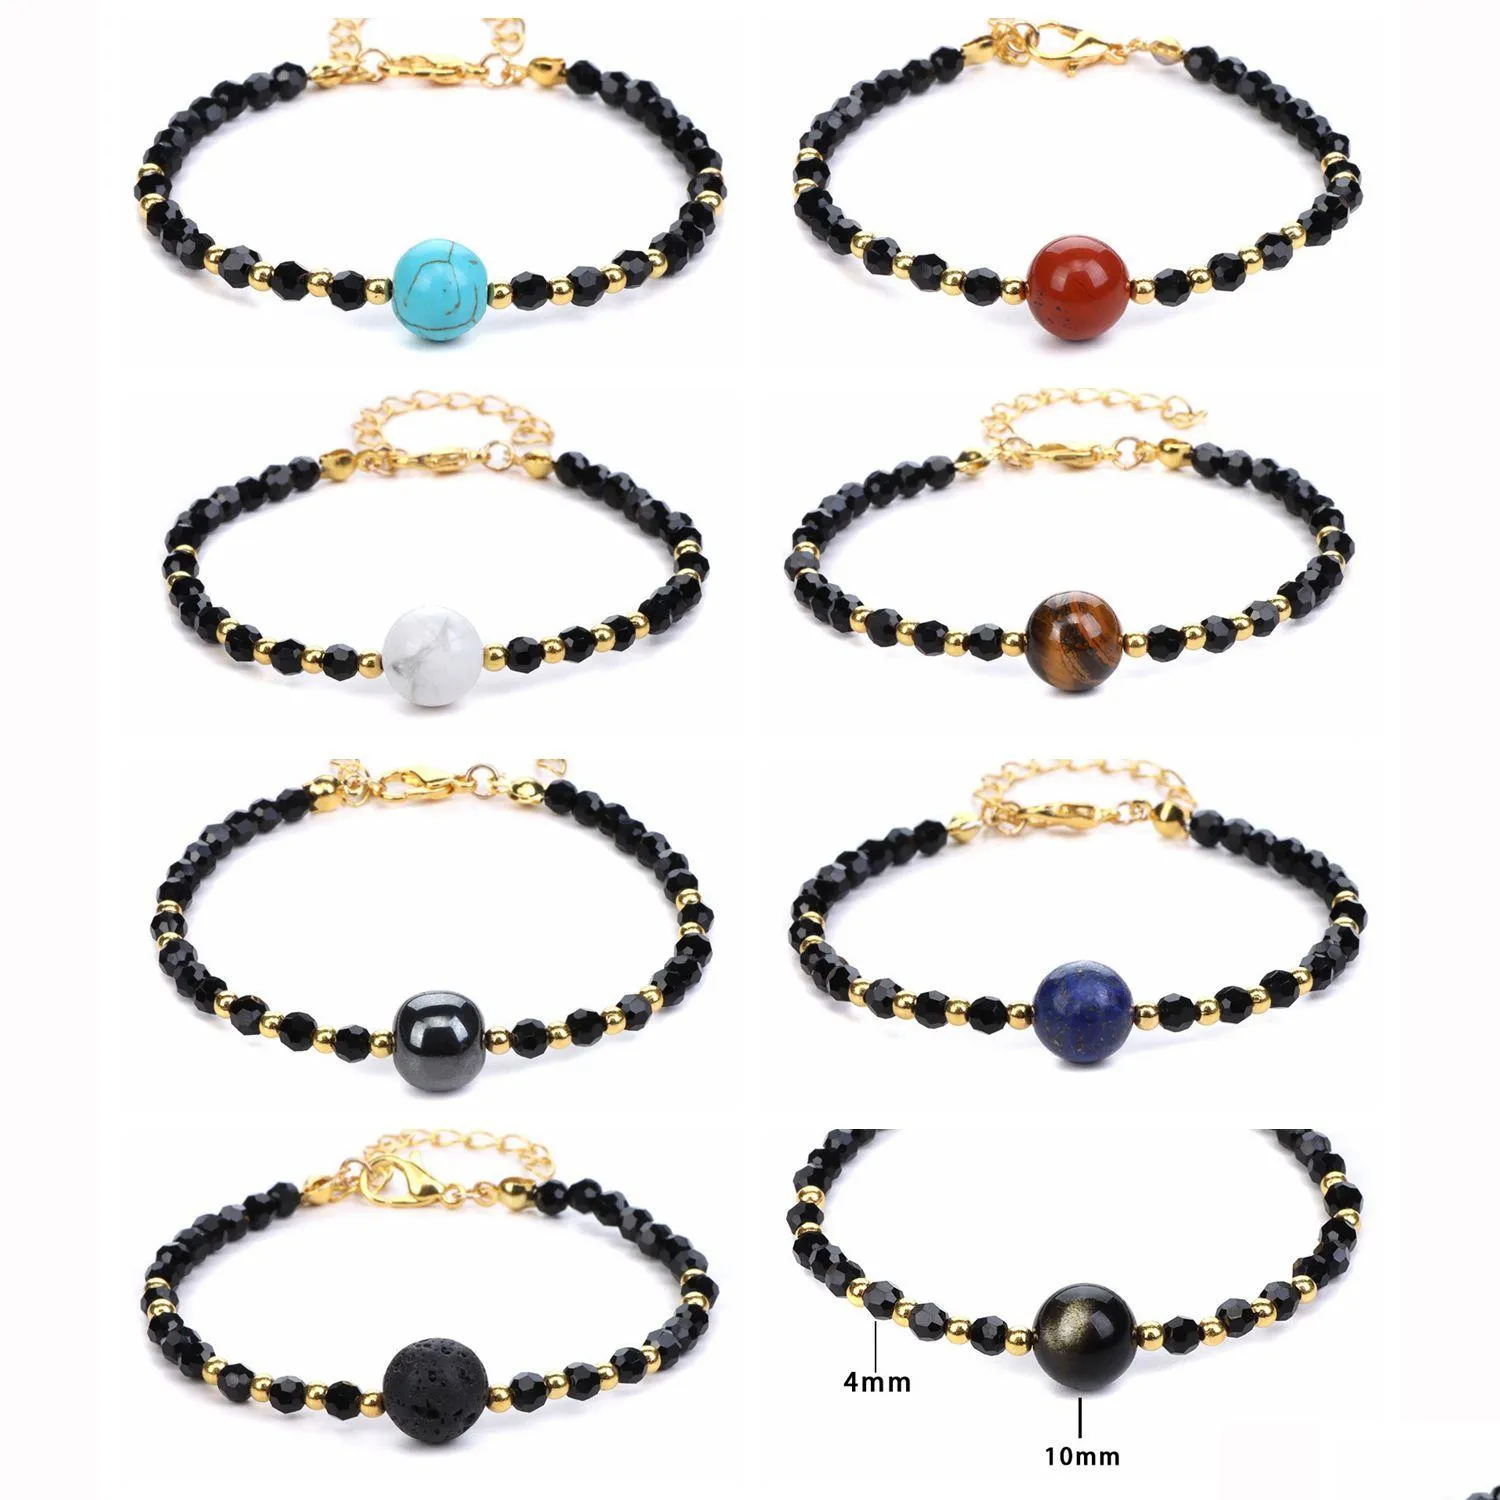 natural stones bracelets for women girls adjustable gold wire wrapped 10mm round gemstone beads reiki healing crystal stretch ankle